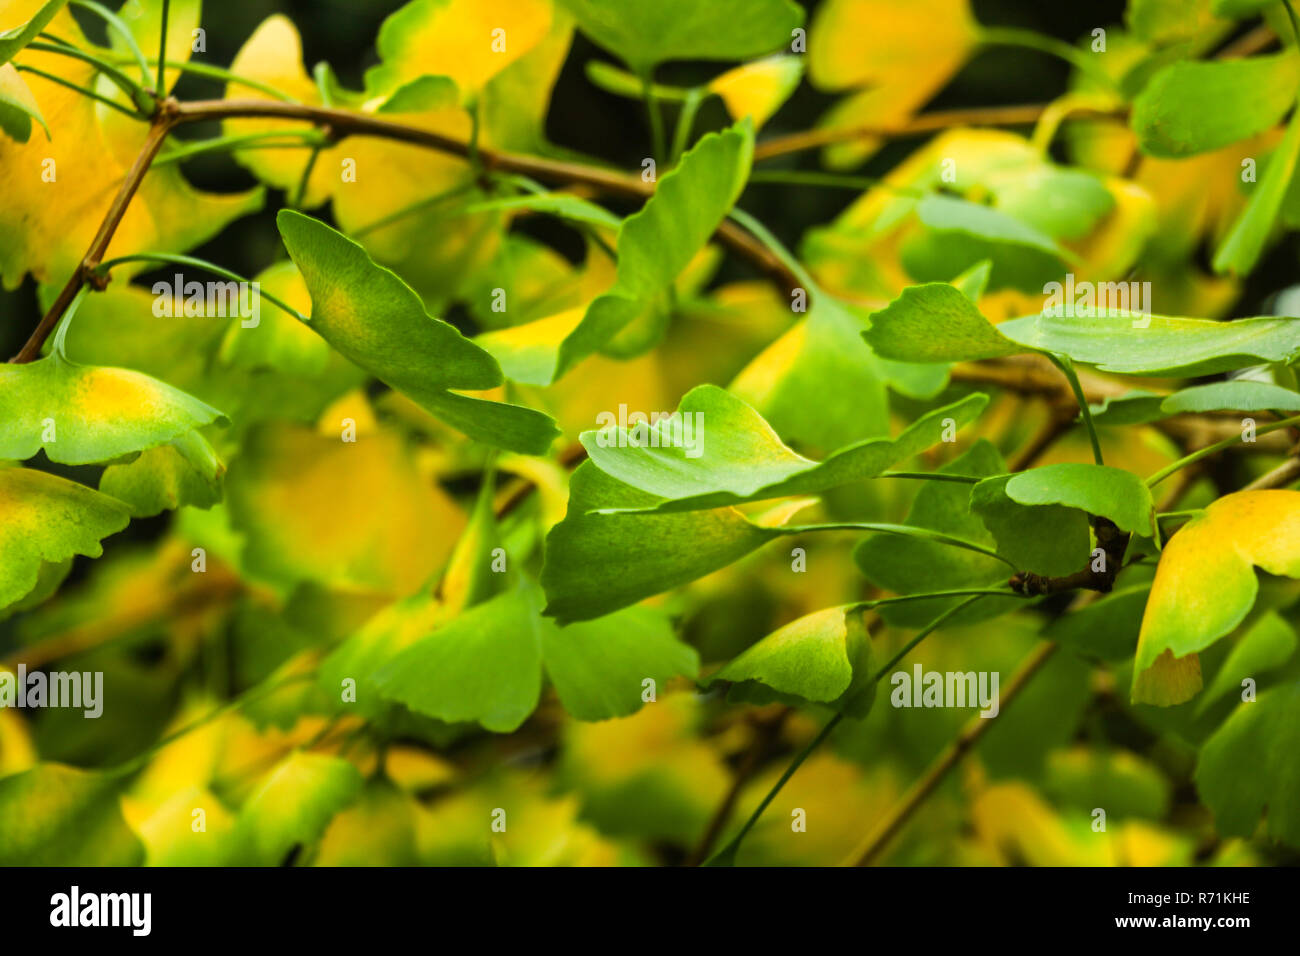 Ginkgo biloba tree branch with leafs against lush green background Stock Photo